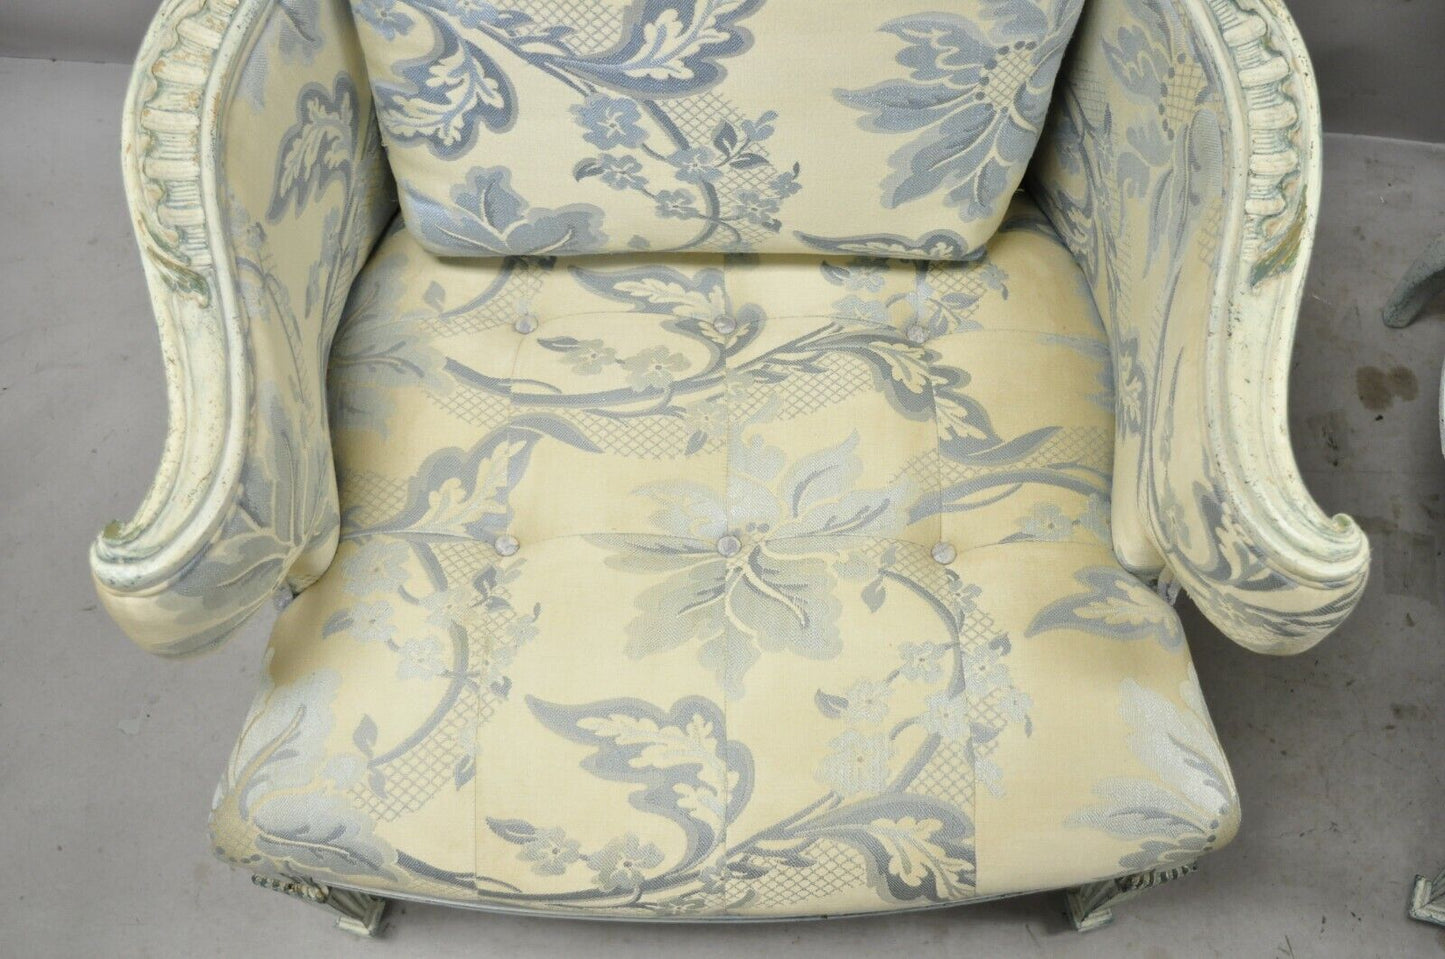 Vintage French Provincial Louis XVI Blue & Cream Painted Club Chairs - a Pair